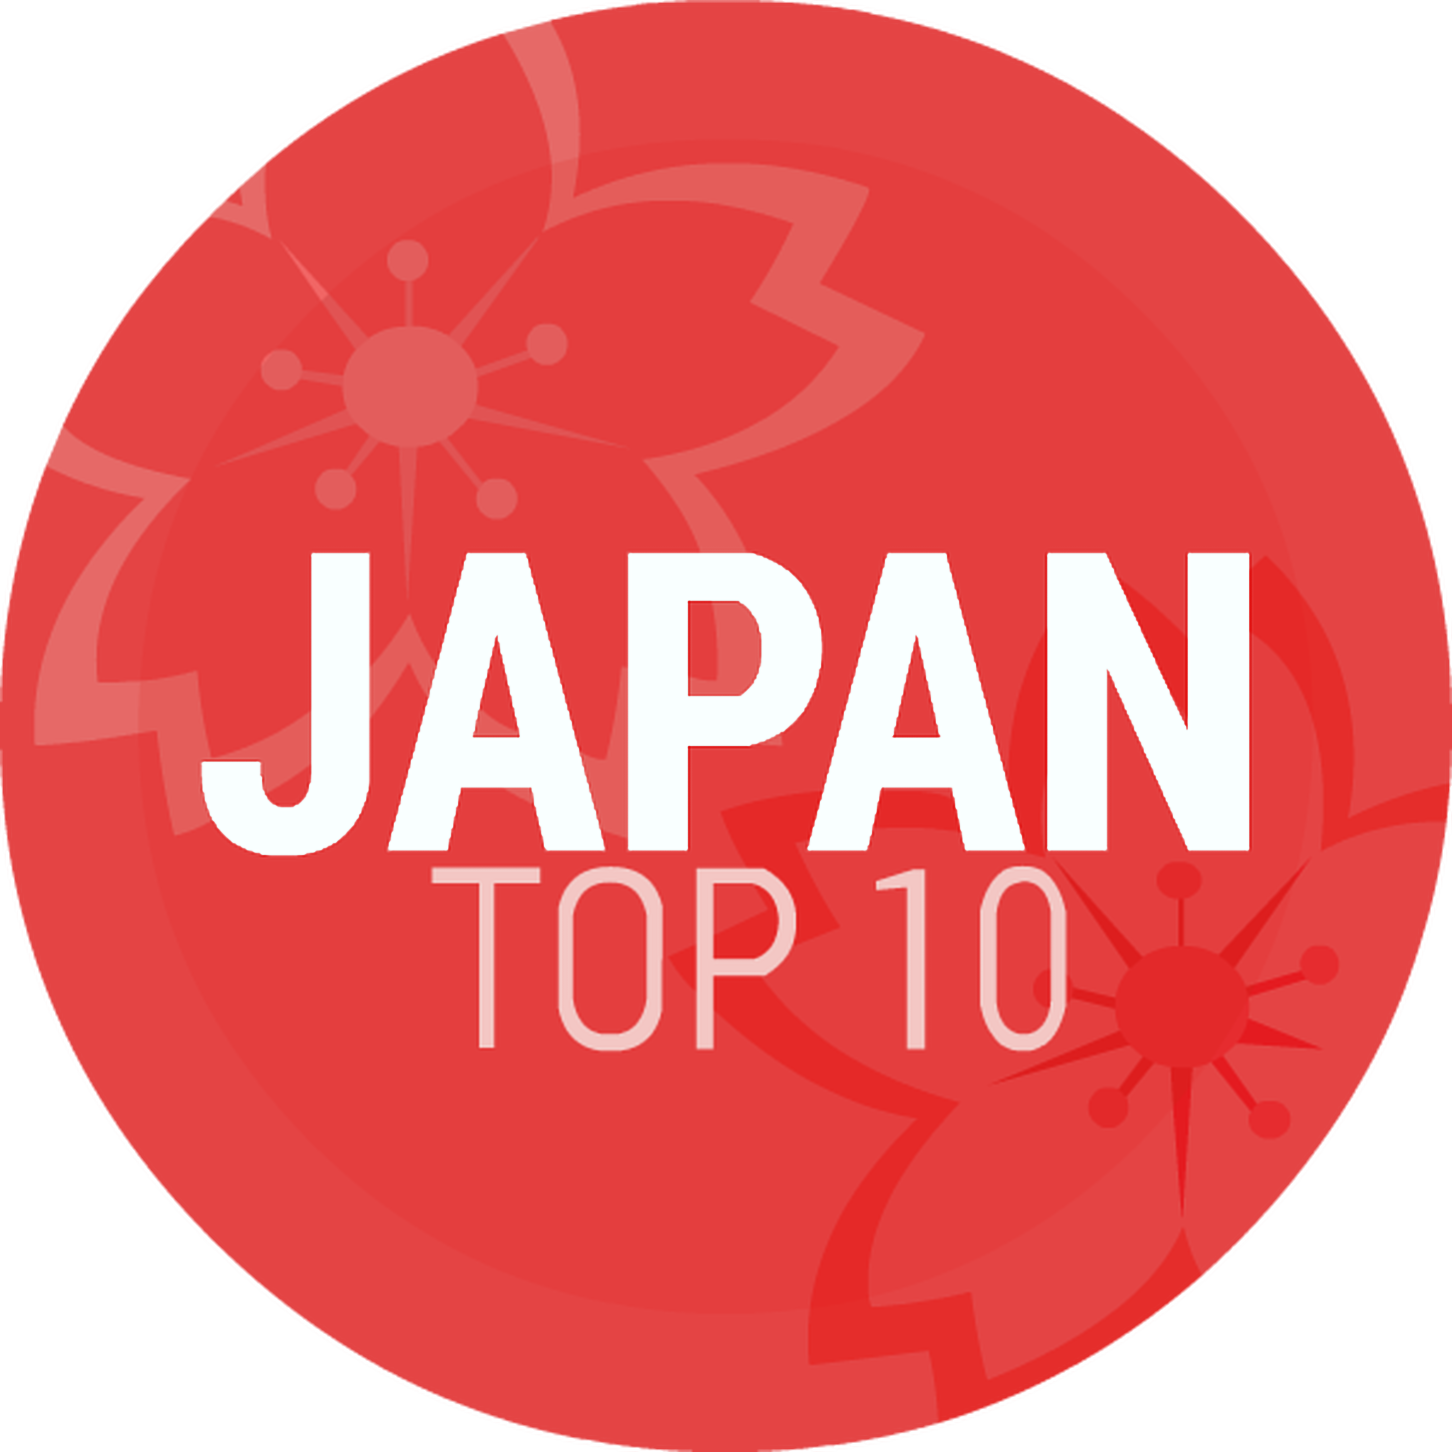 Episode 267: Japan Top 10 January 2019 Special: LIVE! From Nippon Budokan